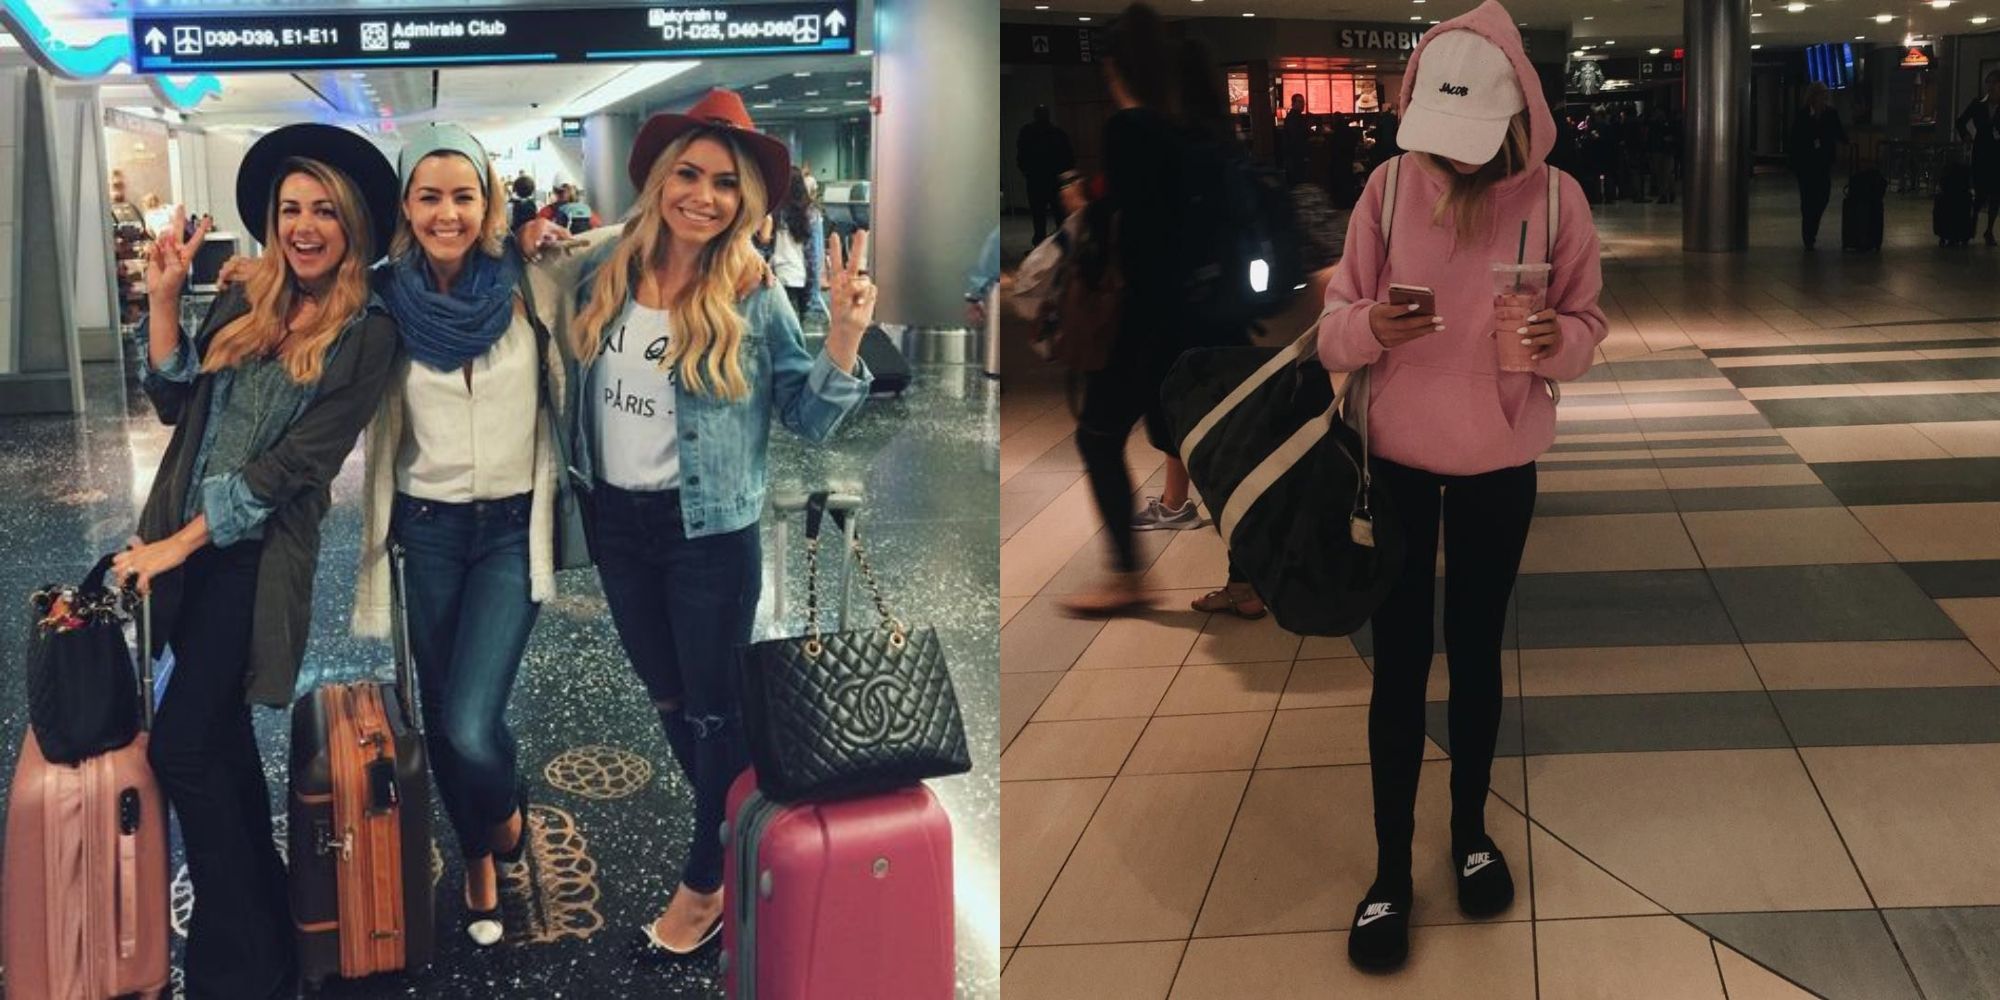 three girls in airport and girl standing holding coffee in airport